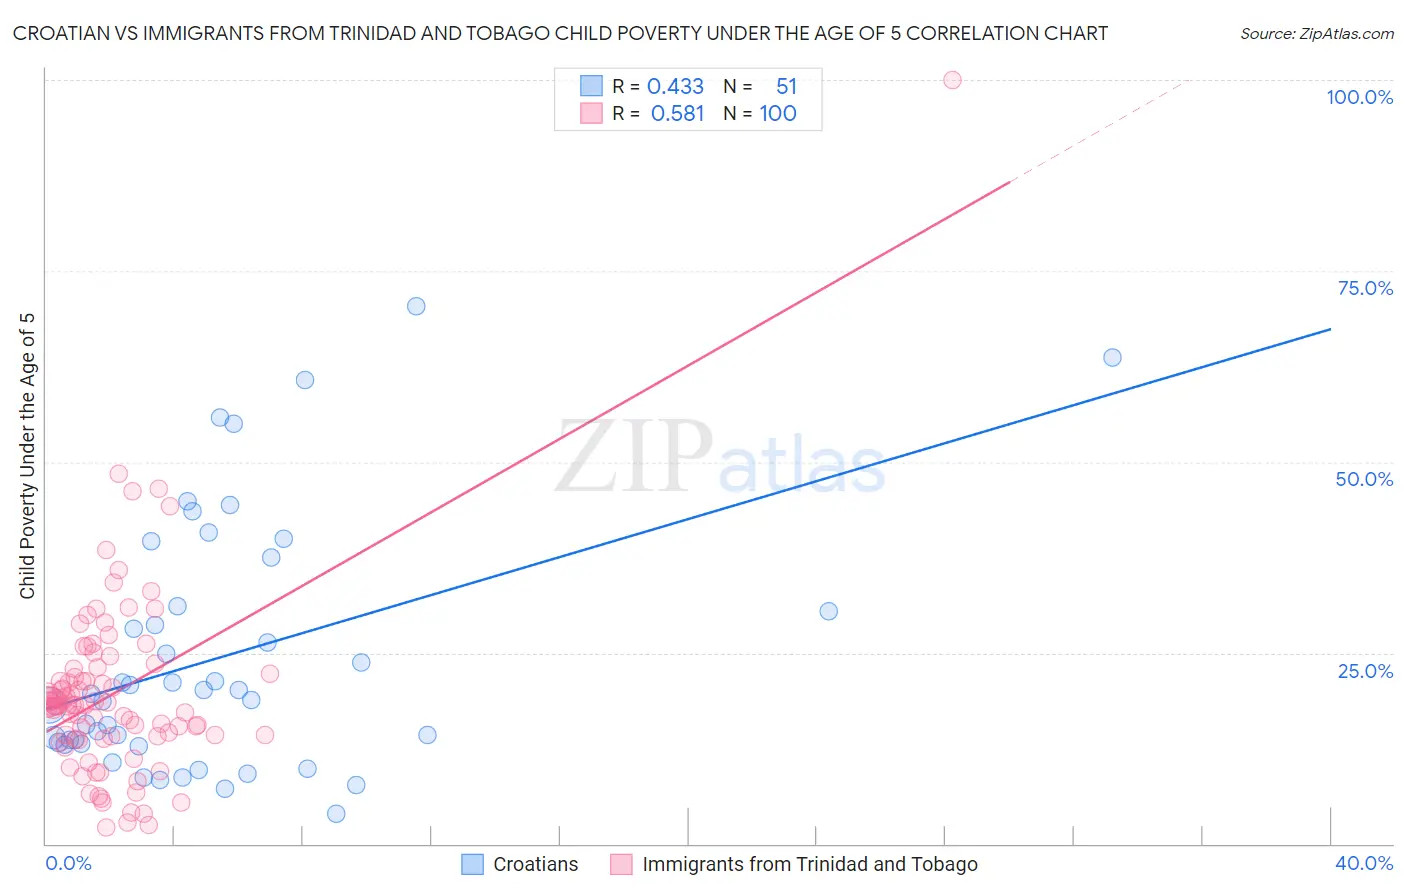 Croatian vs Immigrants from Trinidad and Tobago Child Poverty Under the Age of 5